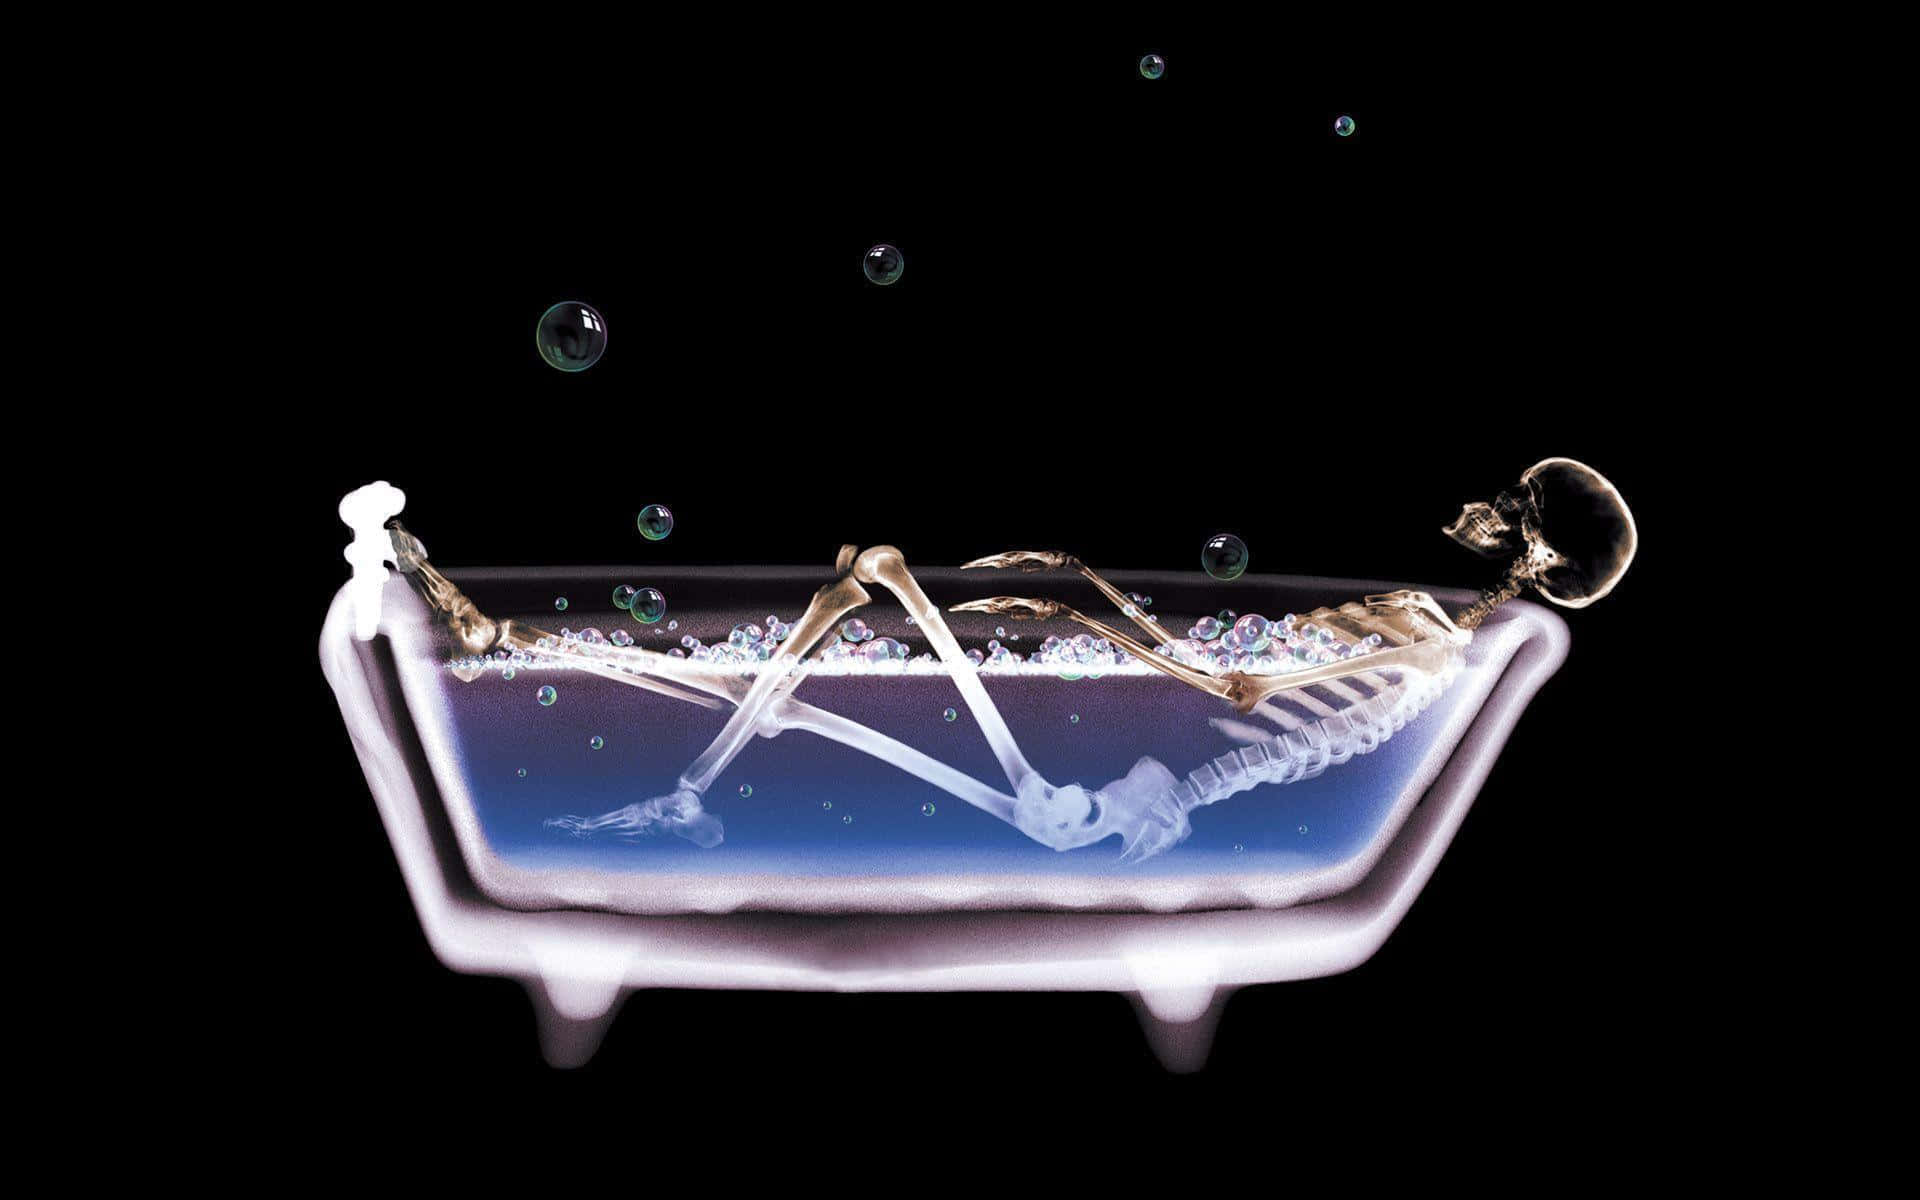 A Skeleton In A Bathtub With Bubbles